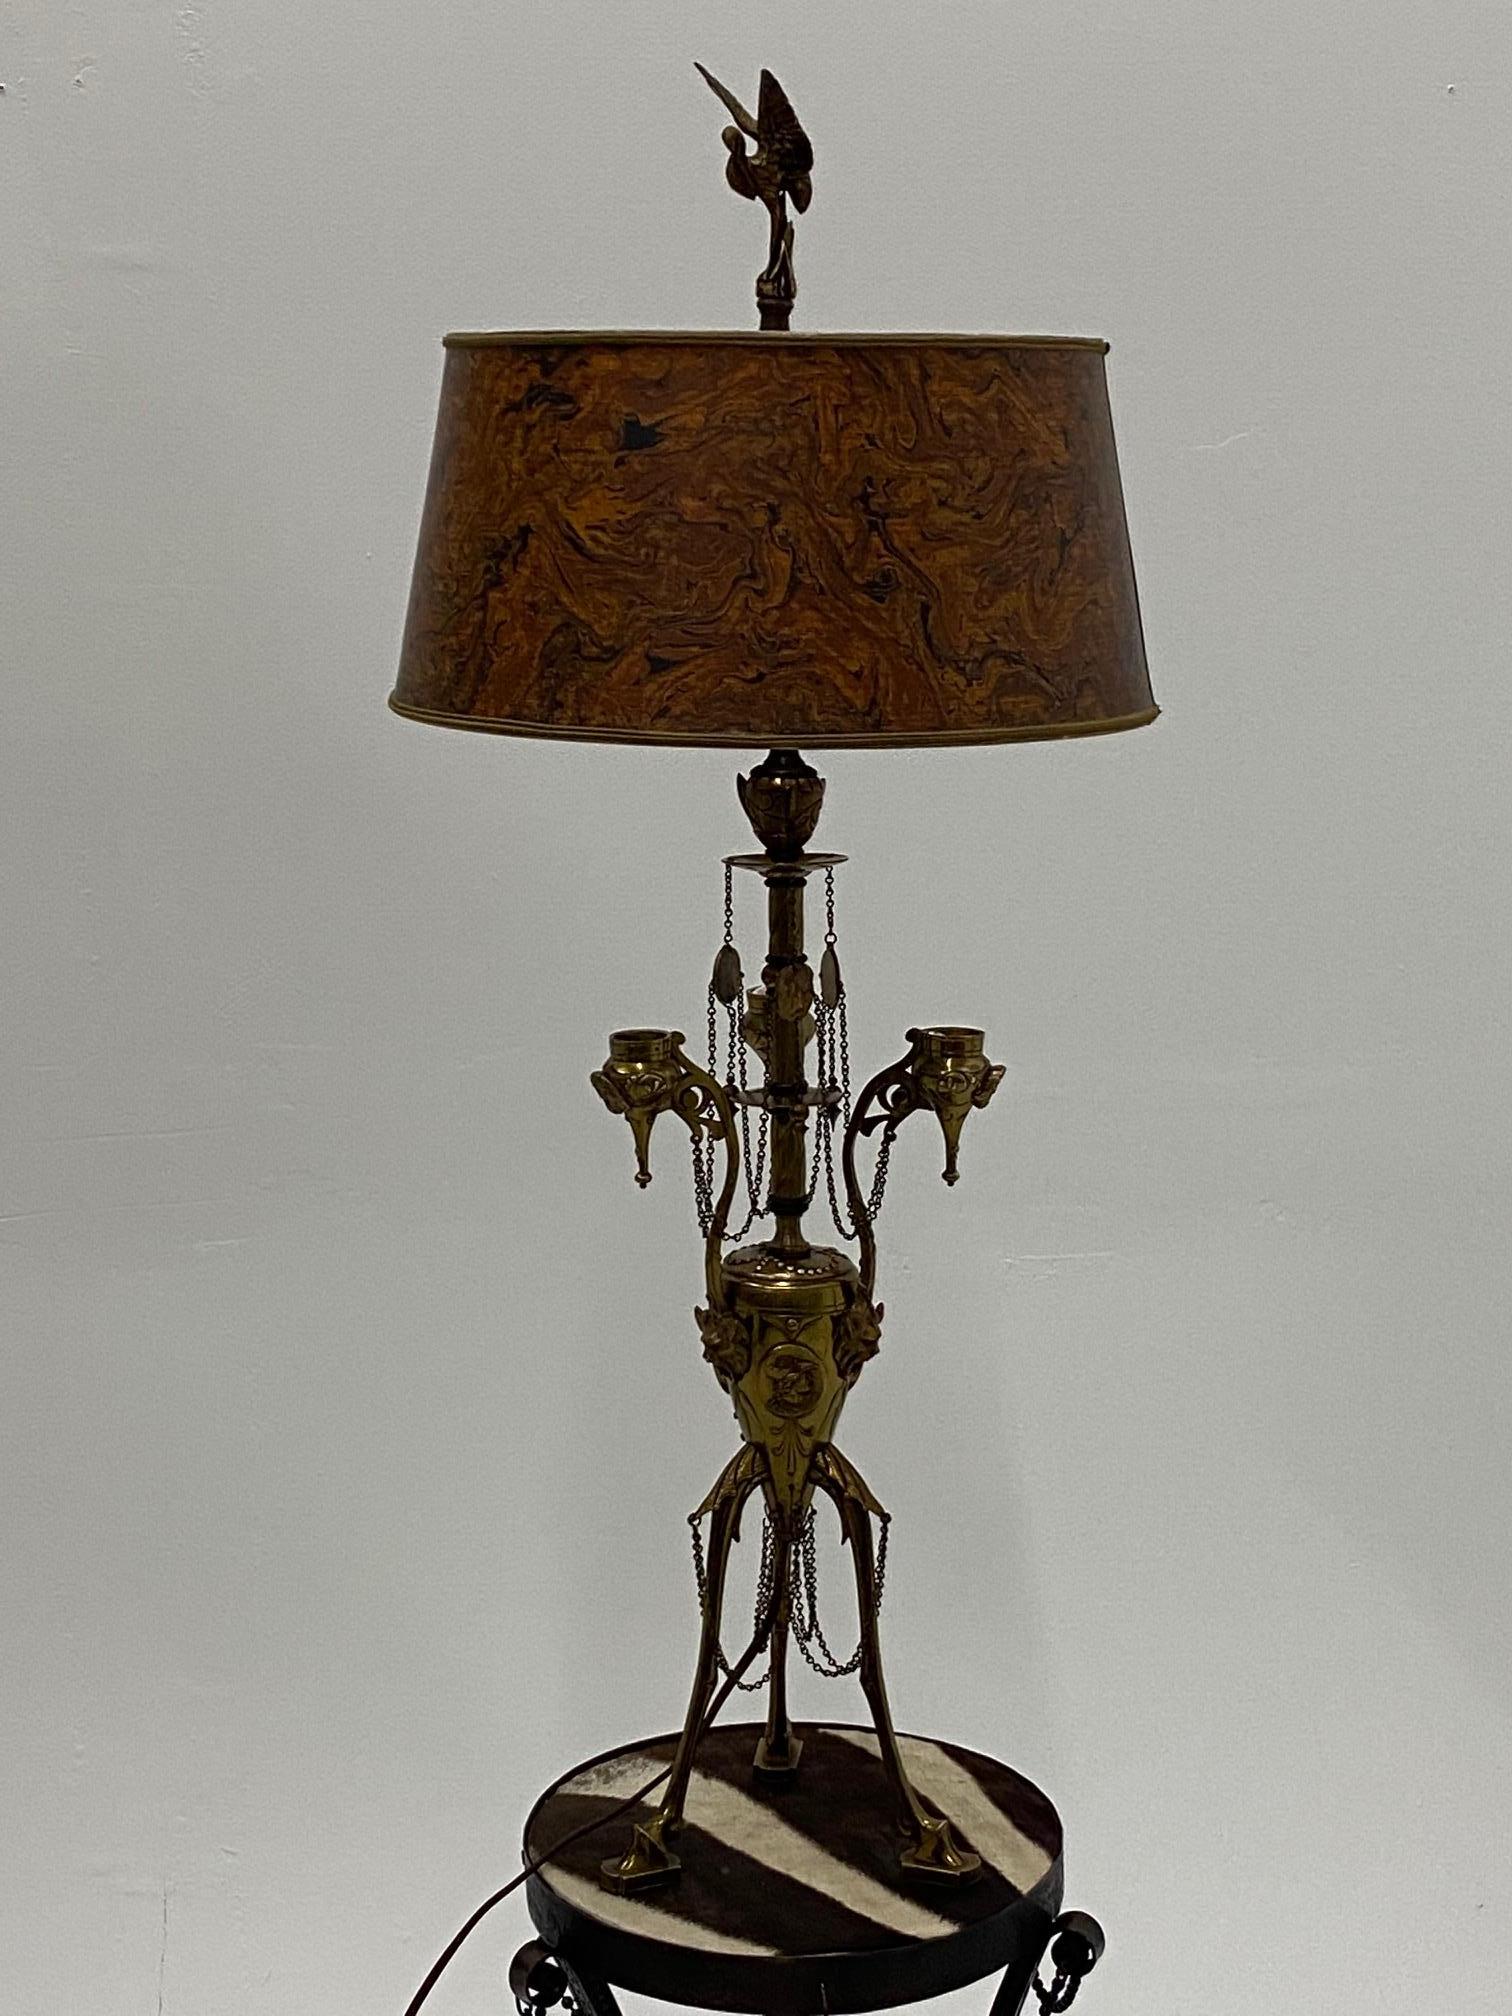 Ornate Antique Continental Neoclassical Brass Candlestick Table Lamp 13